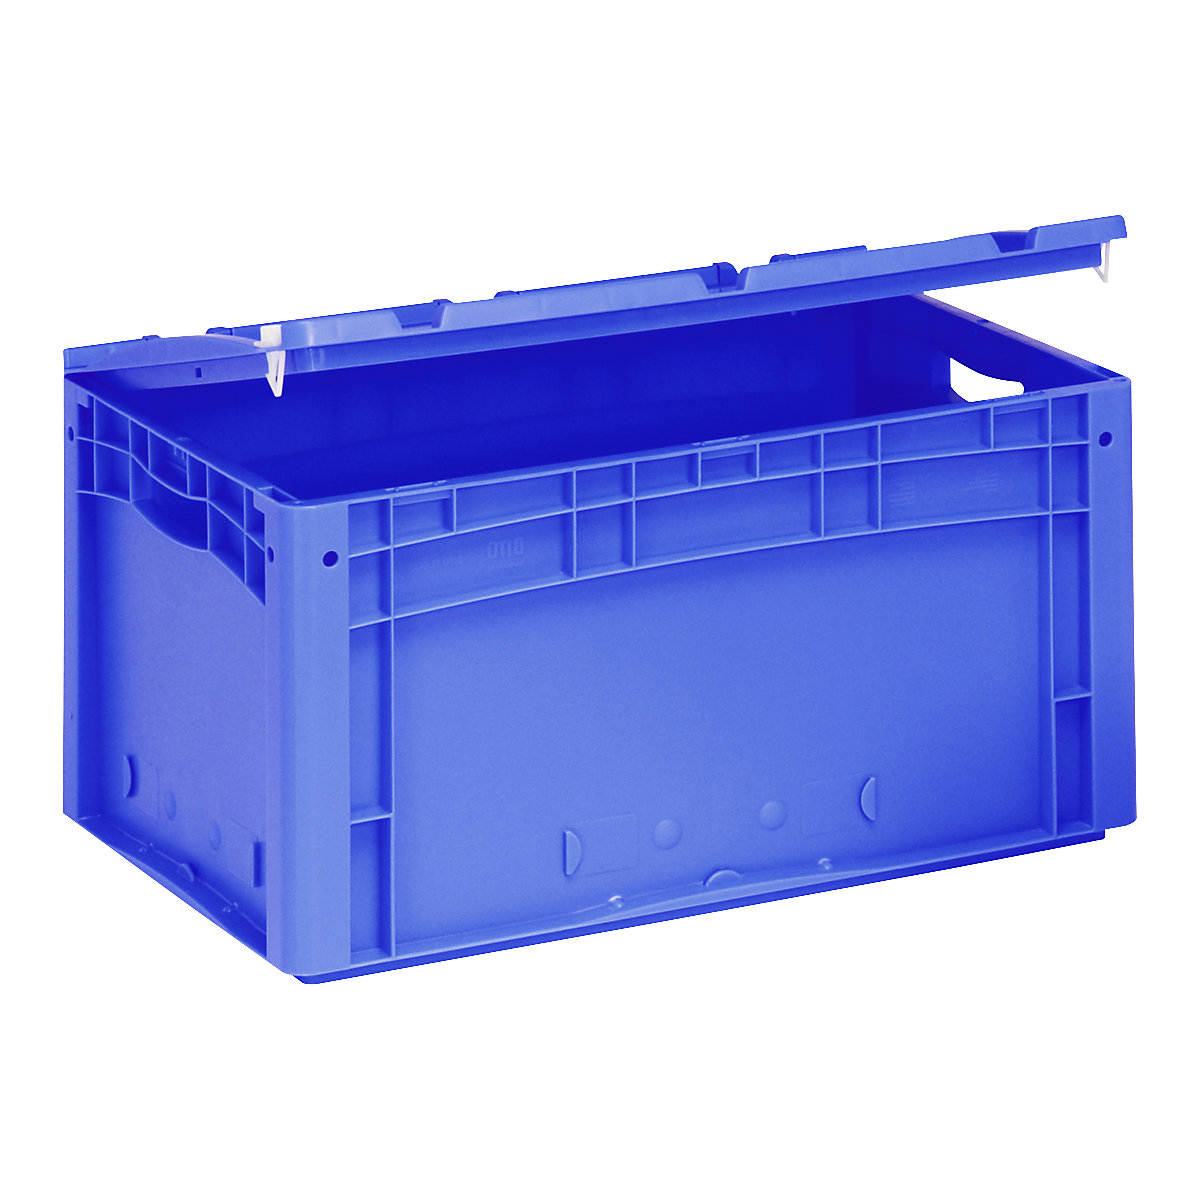 XL Euro stacking container – BITO